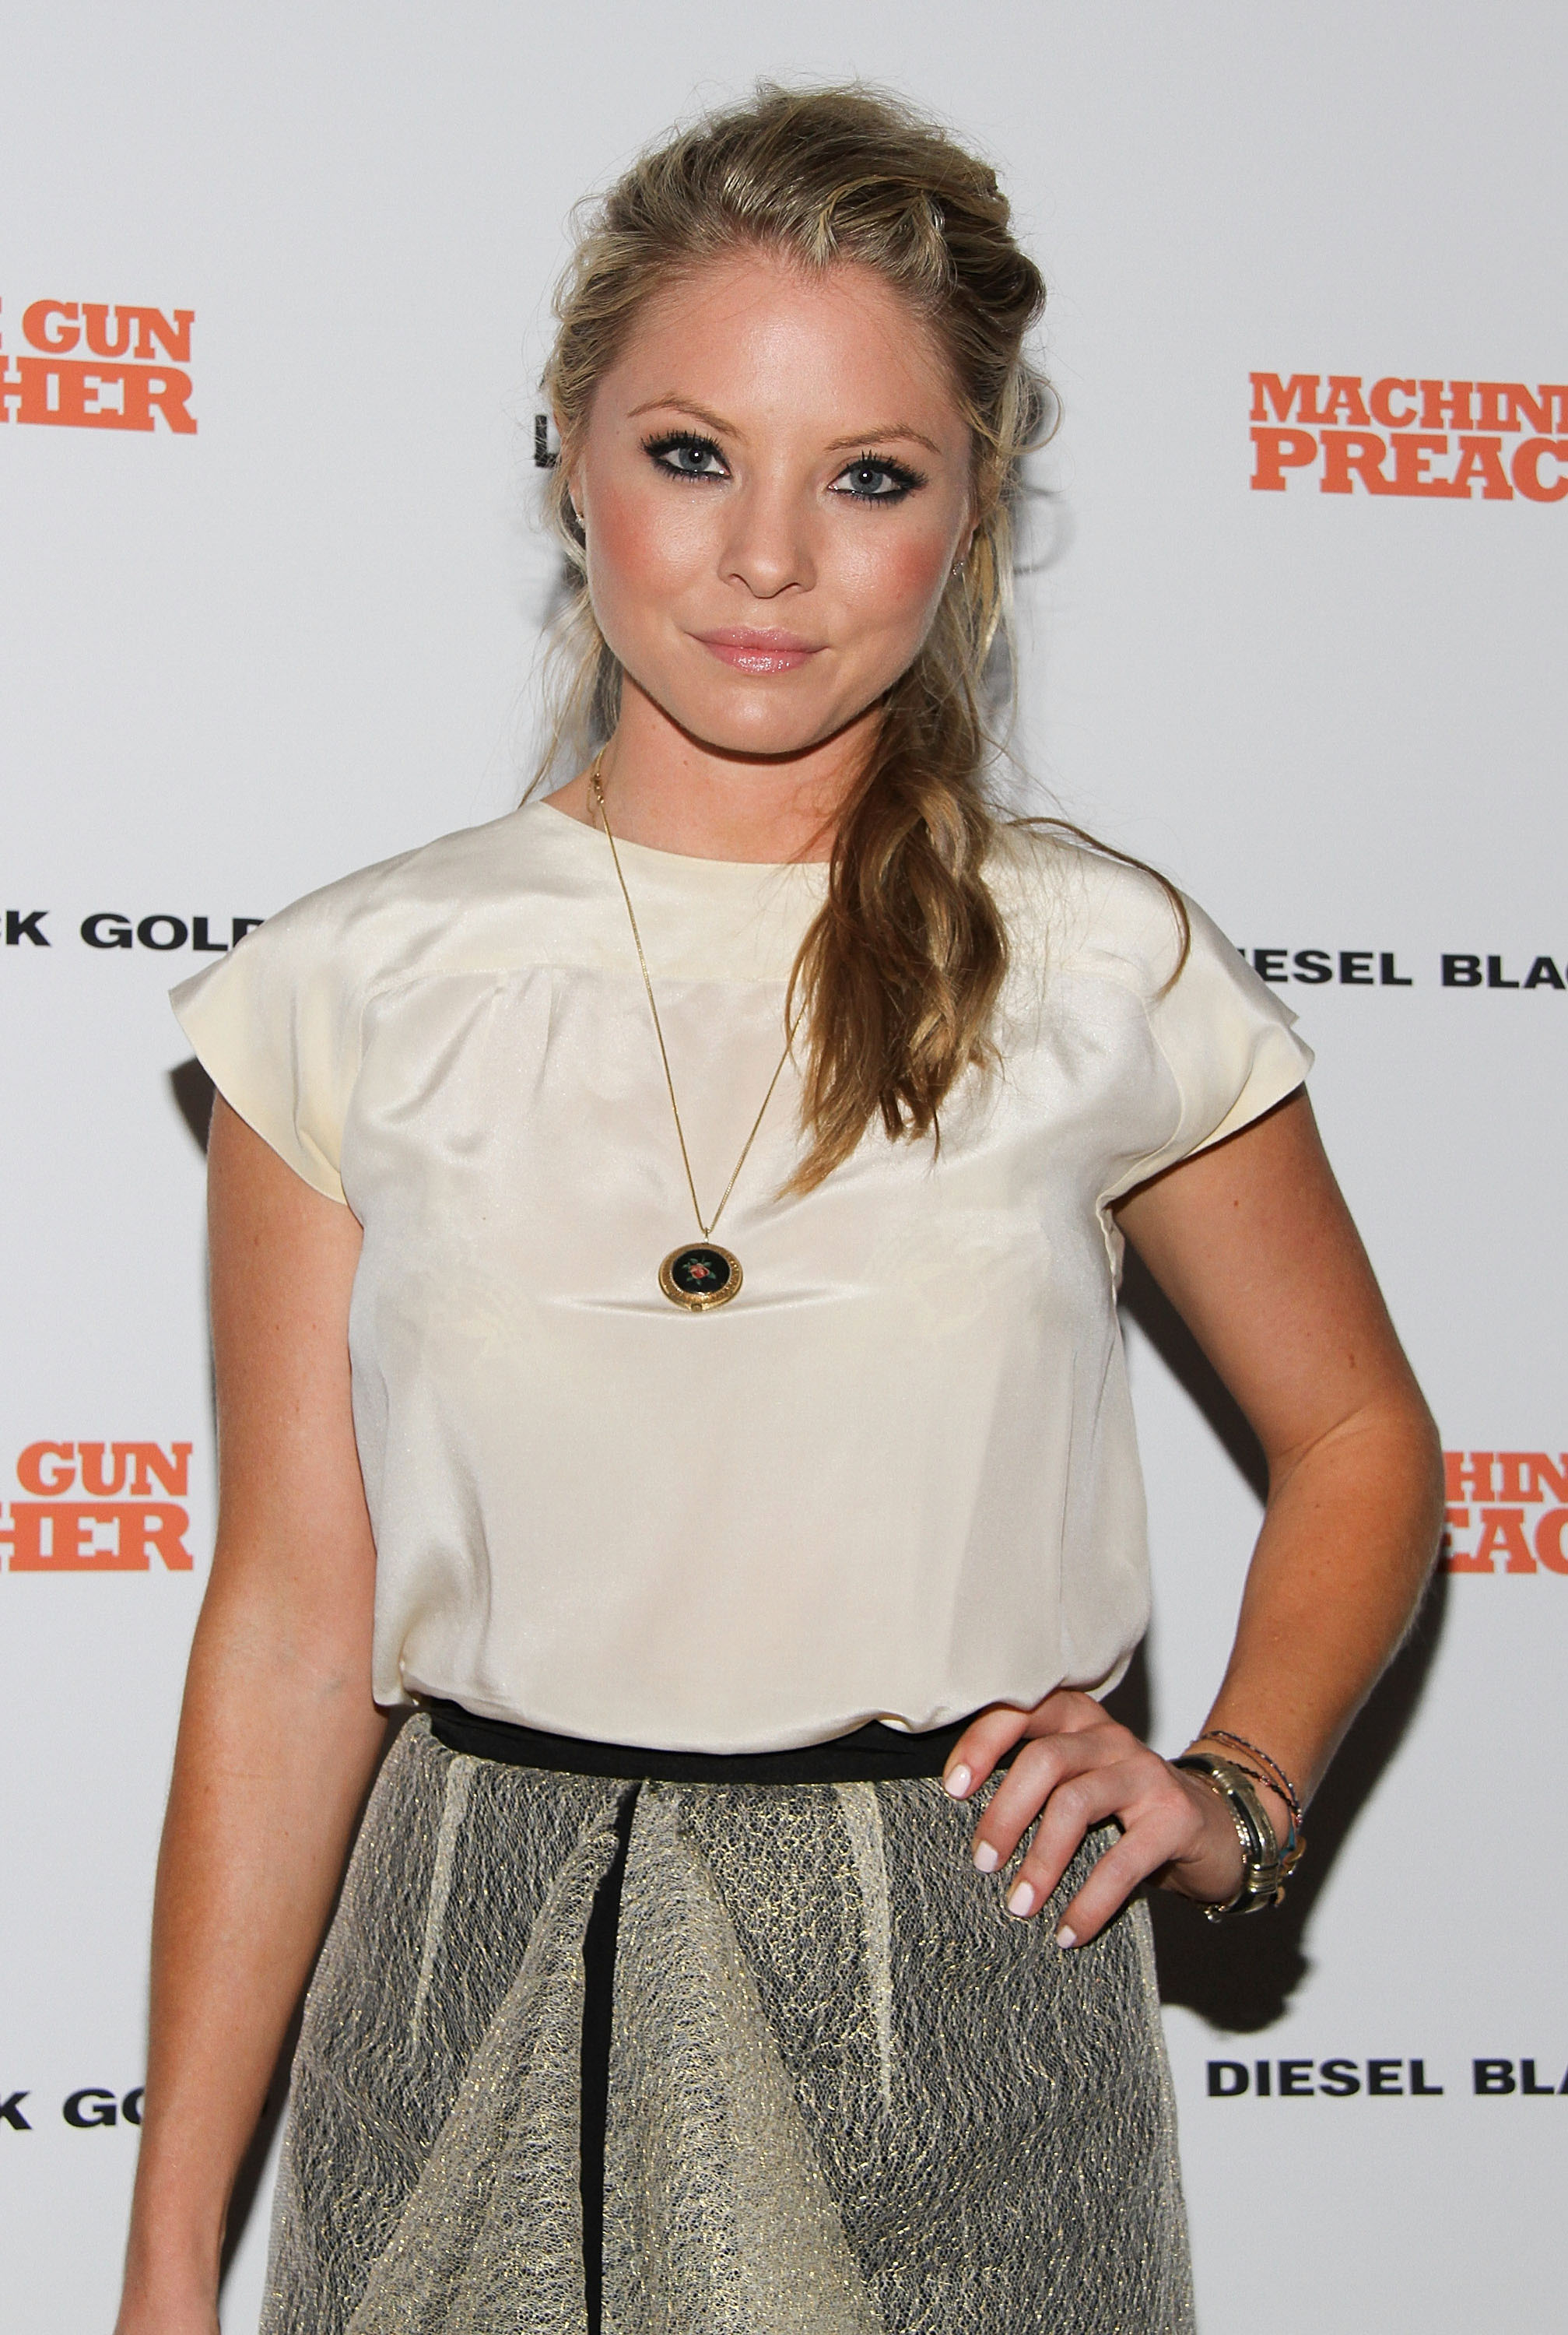 Kaitlin Doubleday From Hung.